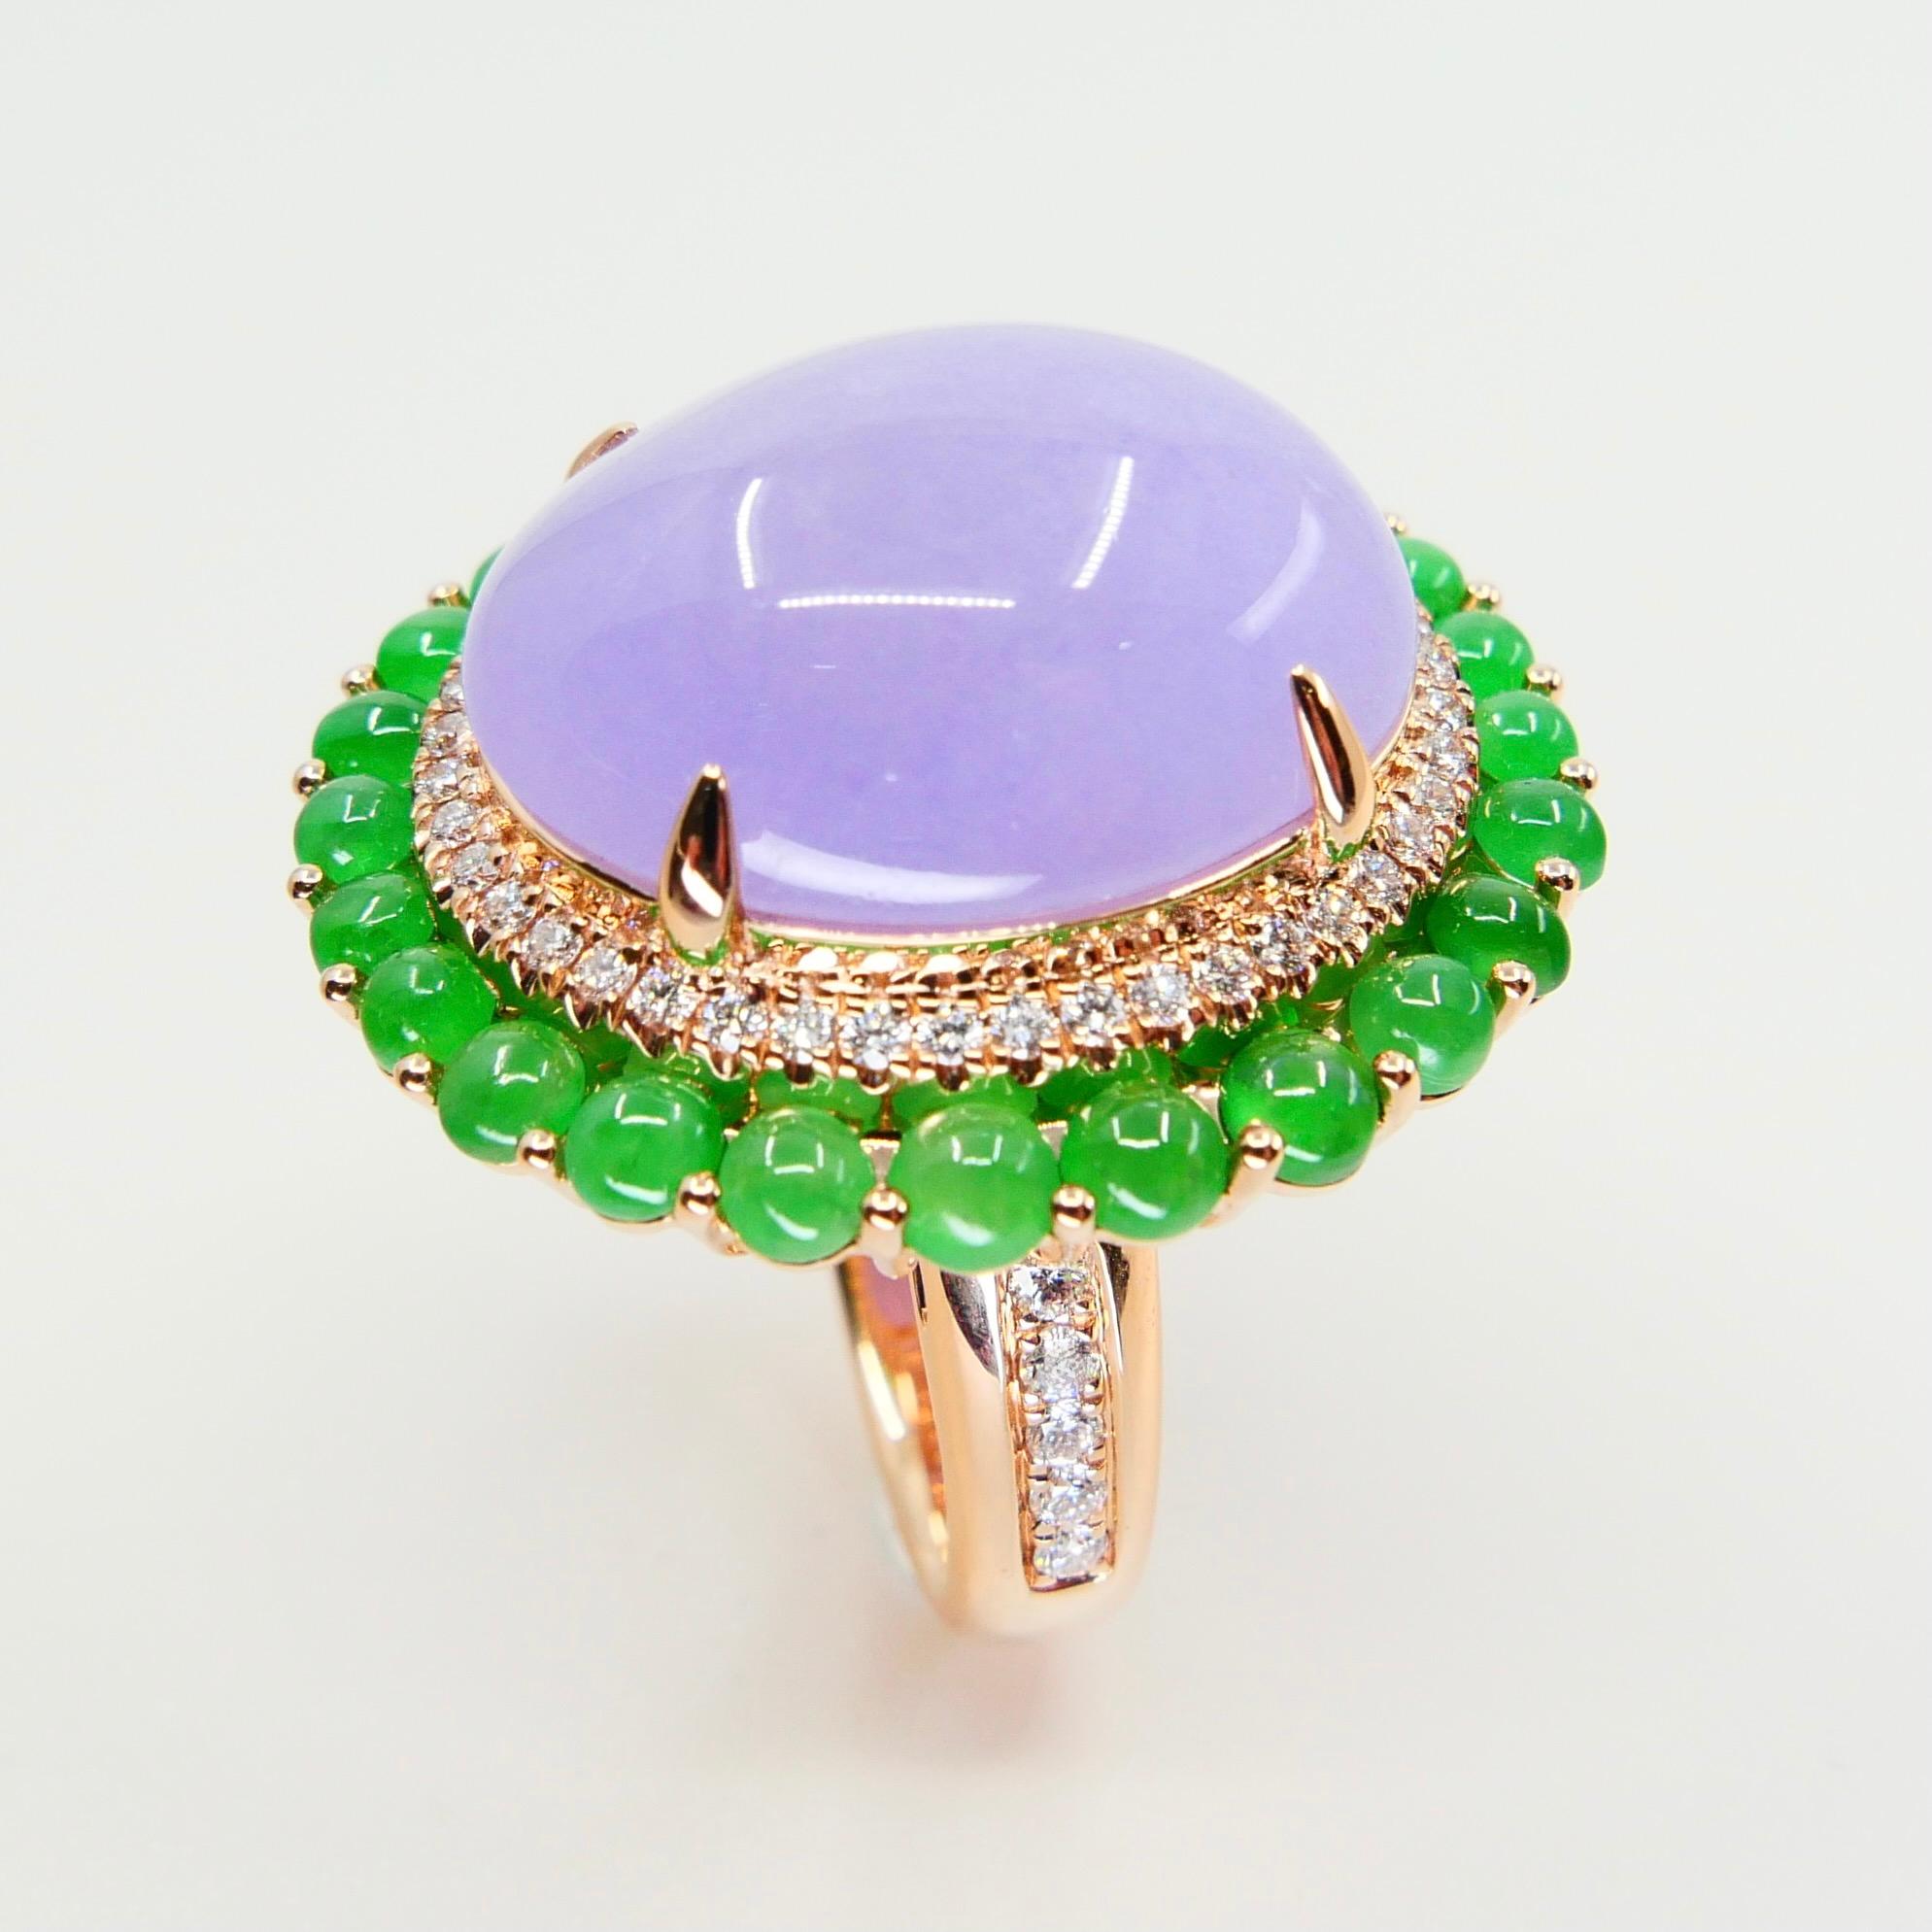 Contemporary Certified 22 Cts Lavender & Apple Green Jade, Diamond Cocktail Ring. Substantial For Sale